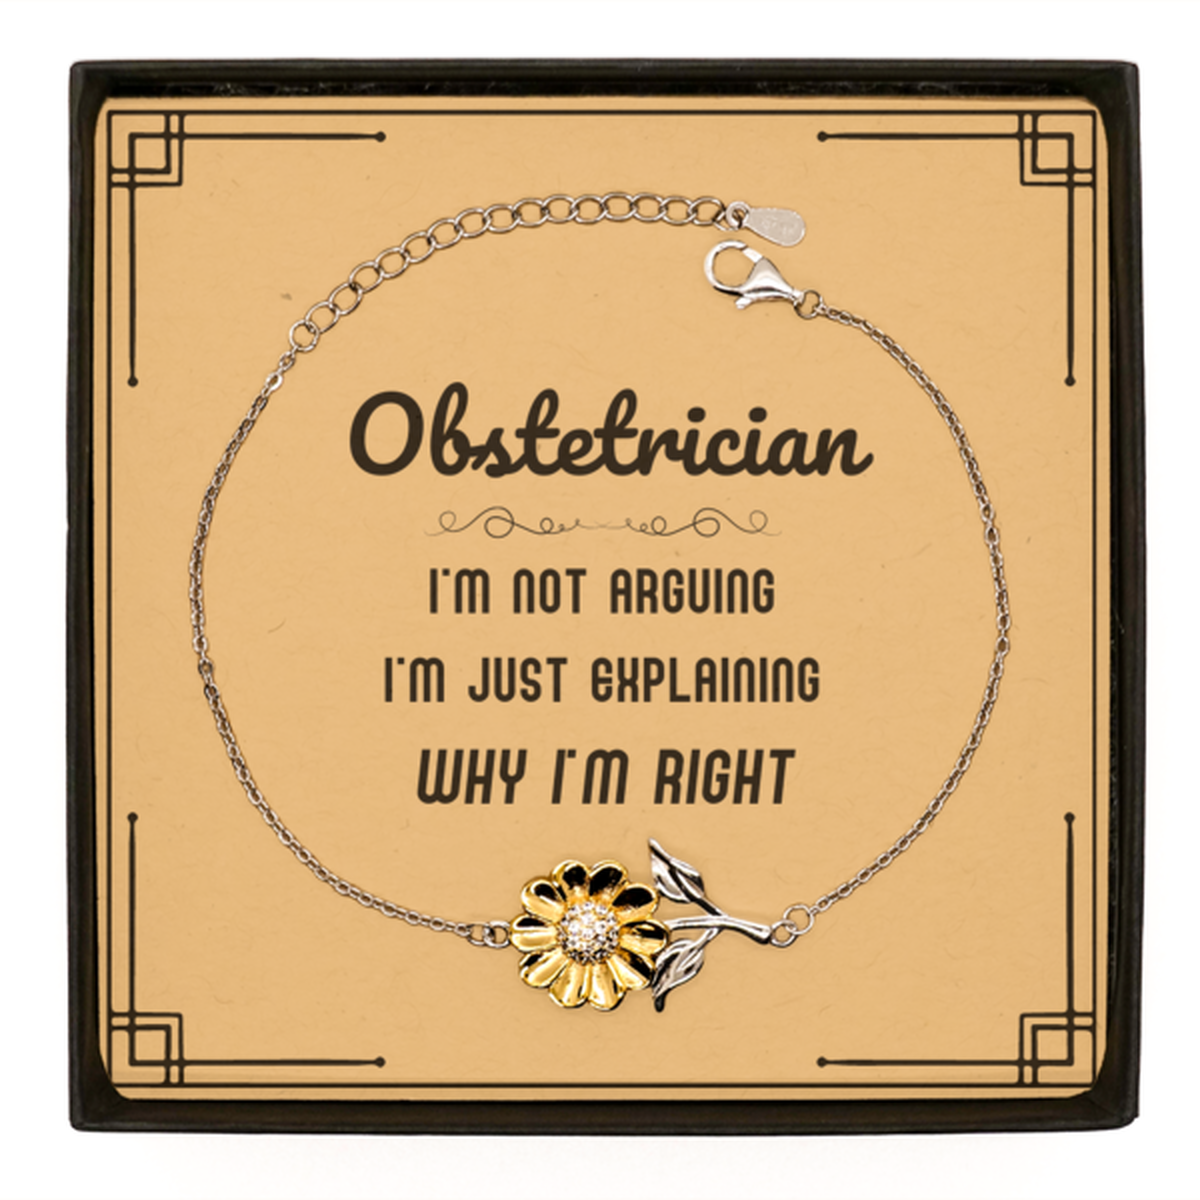 Obstetrician I'm not Arguing. I'm Just Explaining Why I'm RIGHT Sunflower Bracelet, Funny Saying Quote Obstetrician Gifts For Obstetrician Message Card Graduation Birthday Christmas Gifts for Men Women Coworker